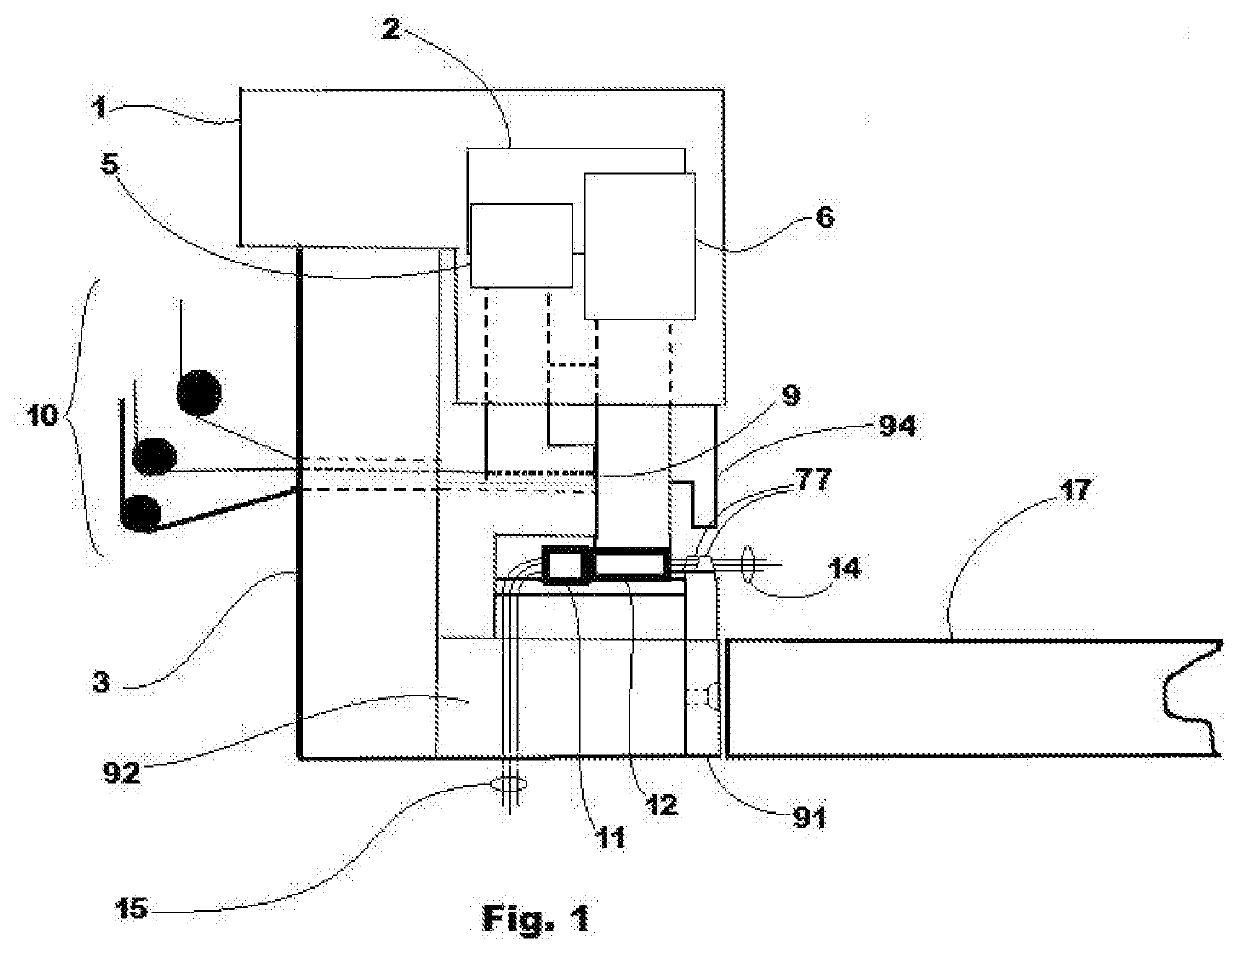 Insulation displacement termination (IDT) for applying multiple electrical wire gauge sizes simultaneously or individually to electrical connectors, stamped and formed strip terminal products, and assembly fixtures thereof